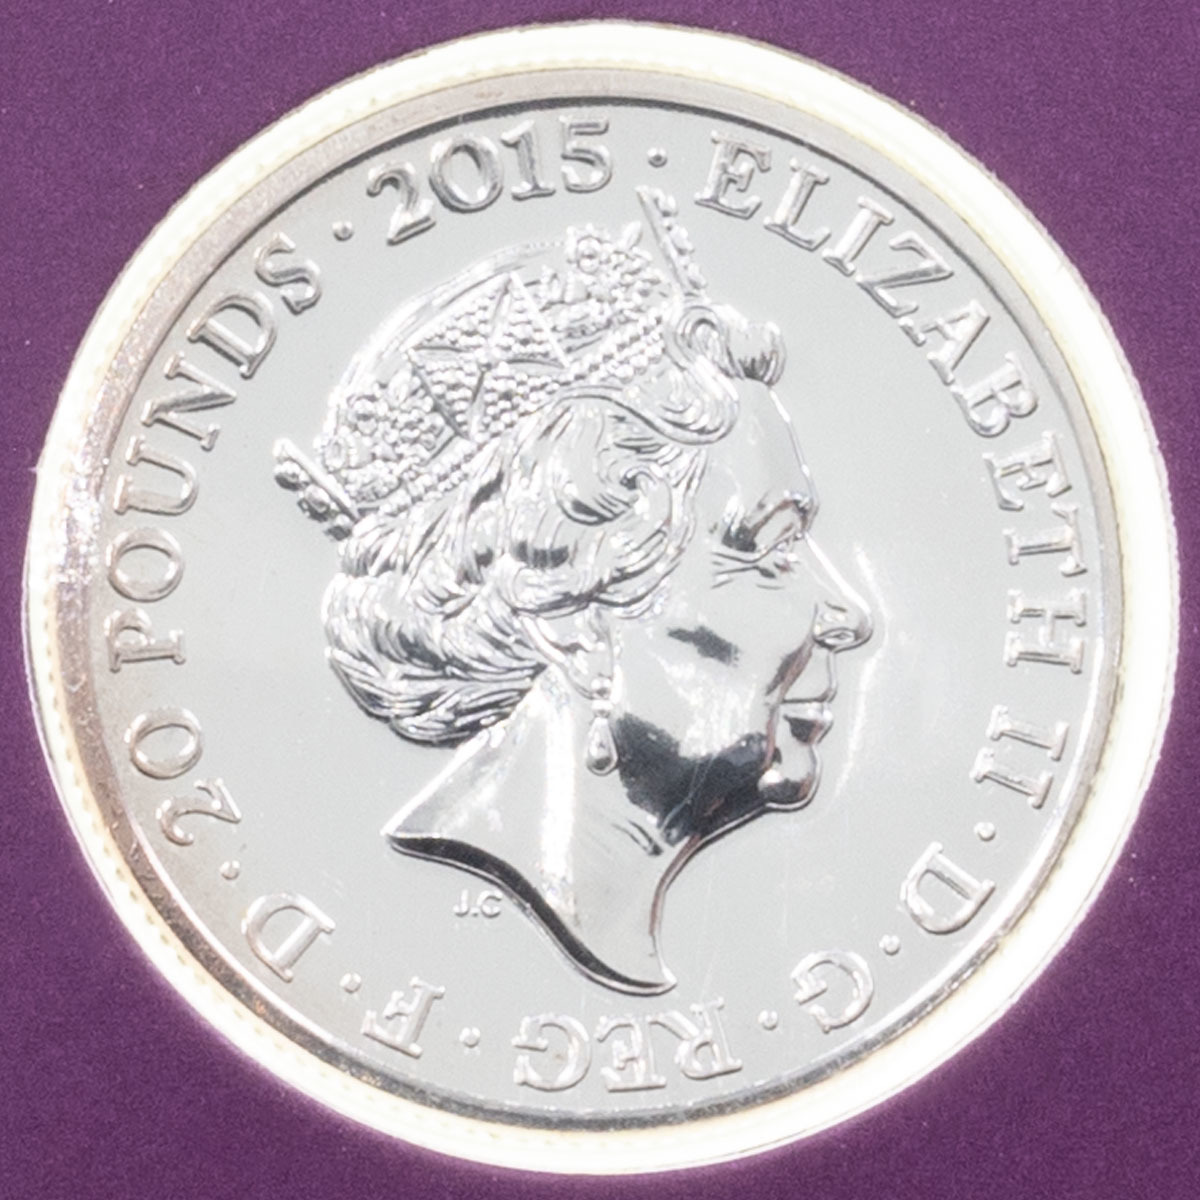 UK1520RM 2015 Longest Reigning Monarch Twenty Pound Silver Brilliant Uncirculated Coin In Folder Obverse